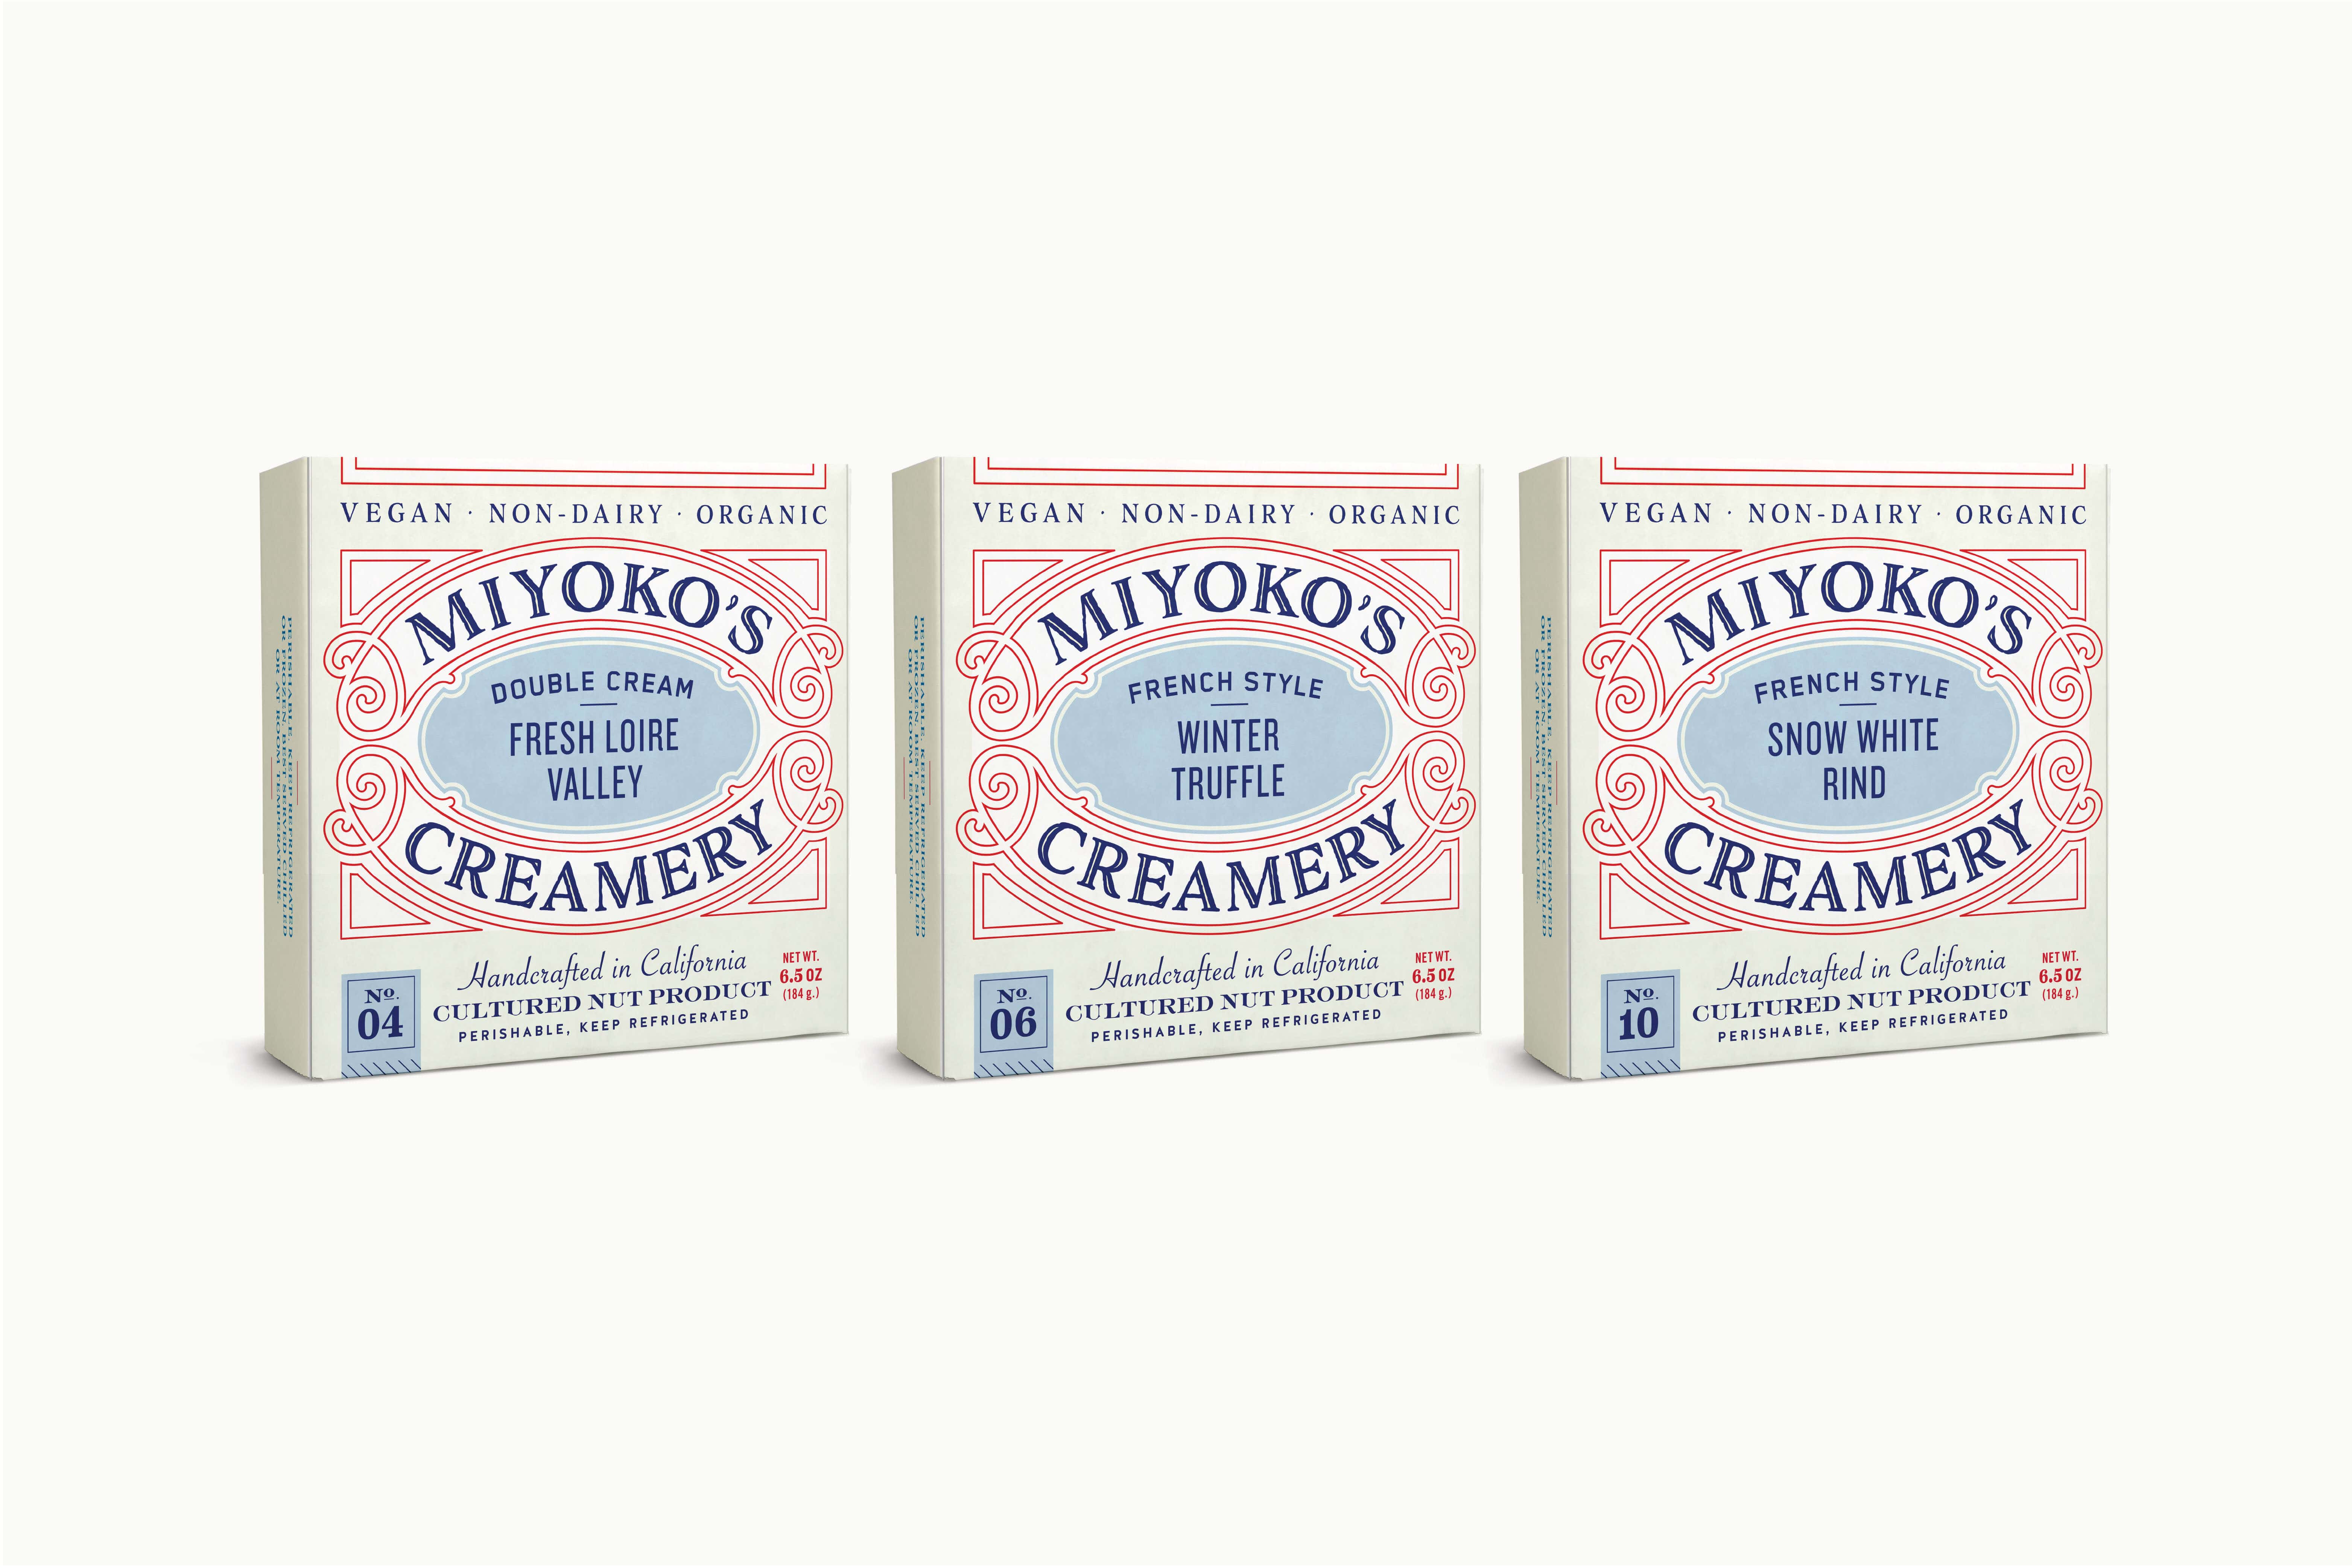 Line extension to more flavors of Miyoko's Creamery Vegan Cheese; Double Cream Fresh from Loire Valley, Winter Truffle and Snow White Rind. 